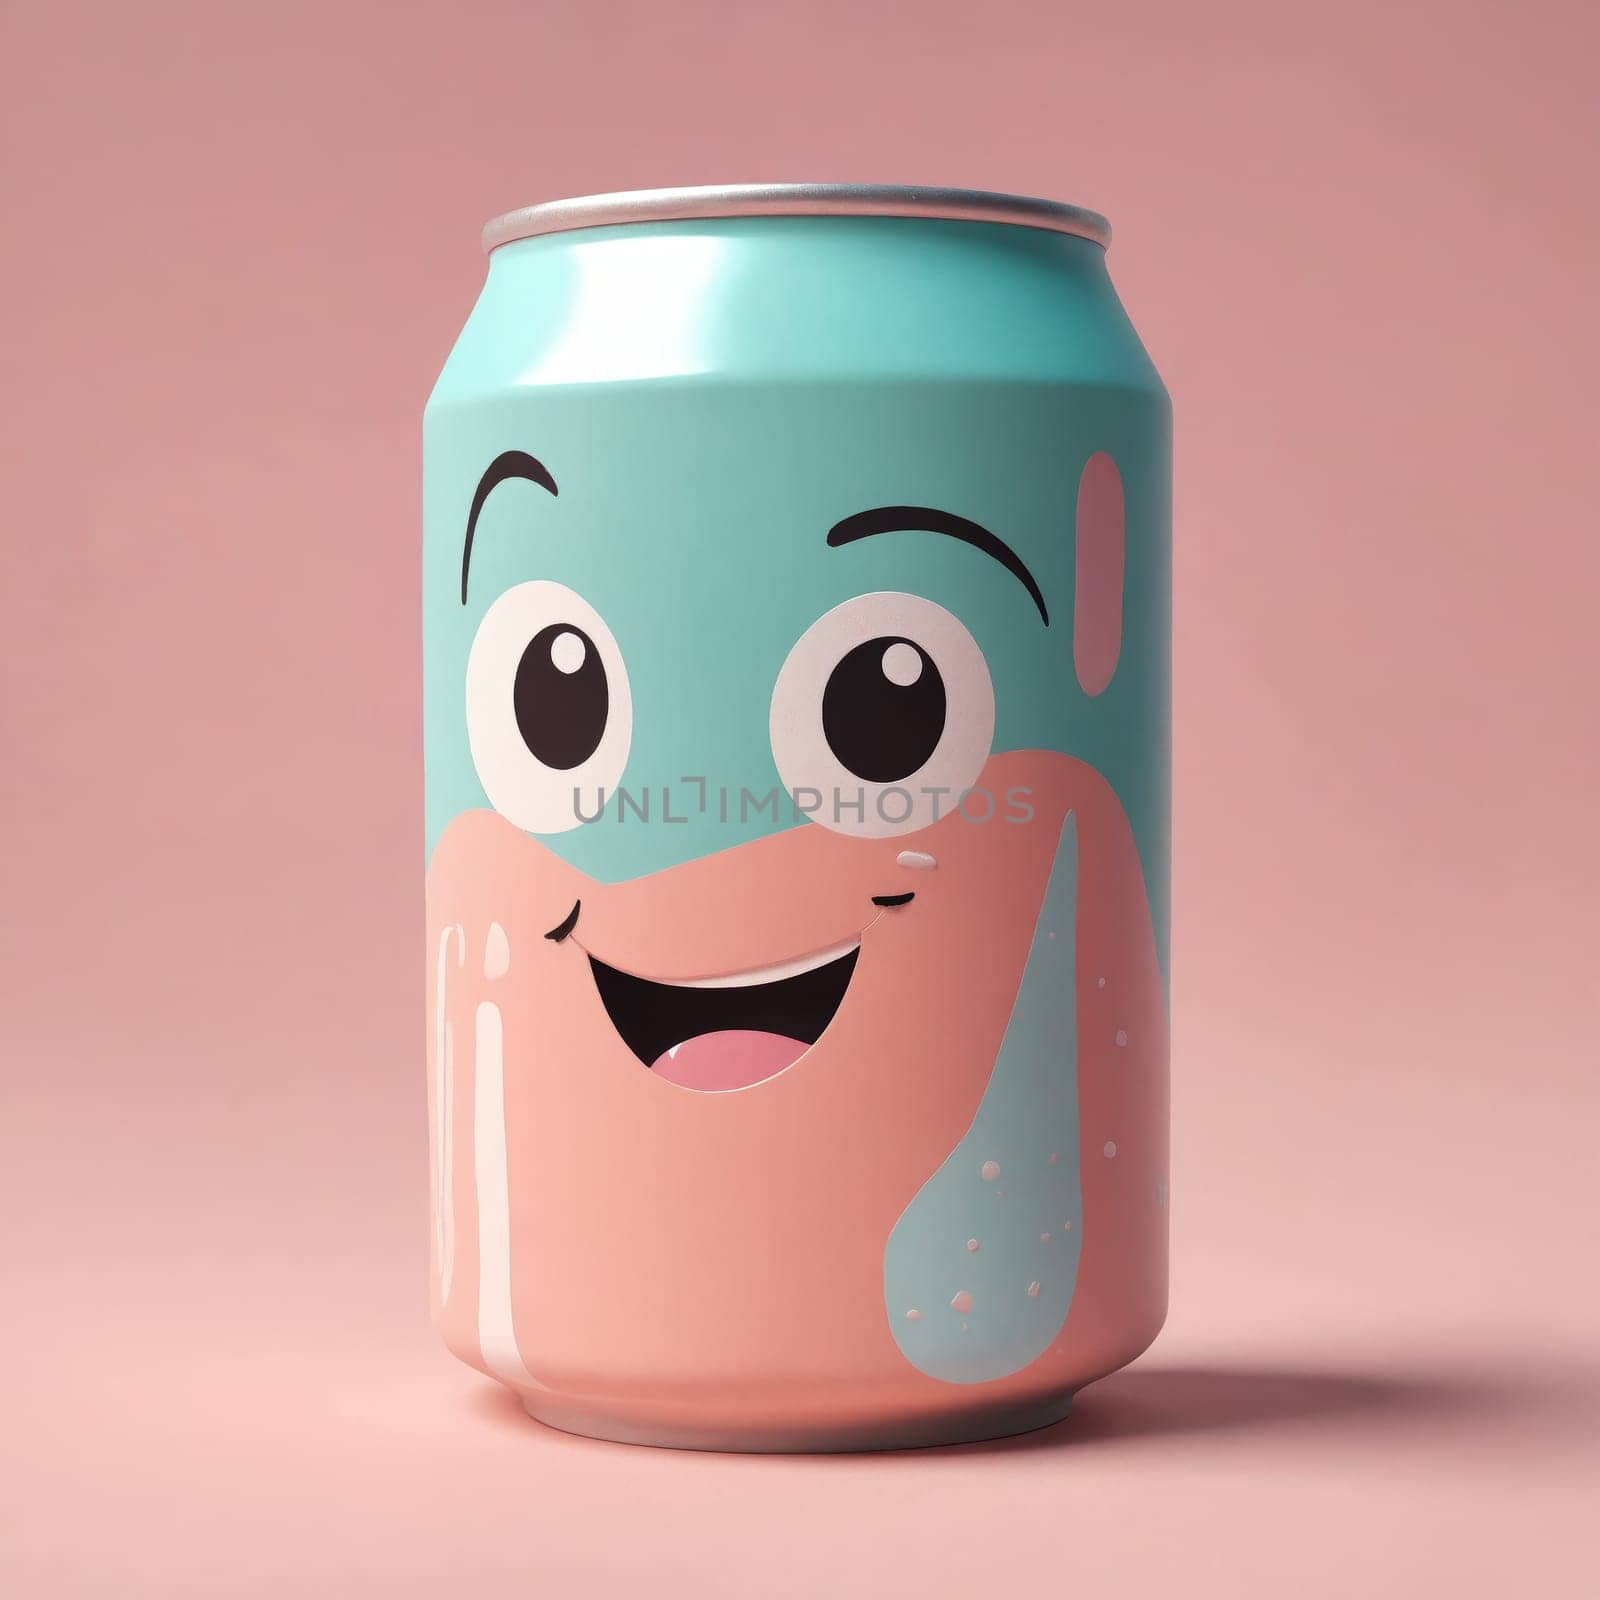 Drinkware in the form of a can of soda with a cartoon face, bright electric blue color, smiling expression. Made of plastic with artistic font. Looks like a fictional character on a fun tableware